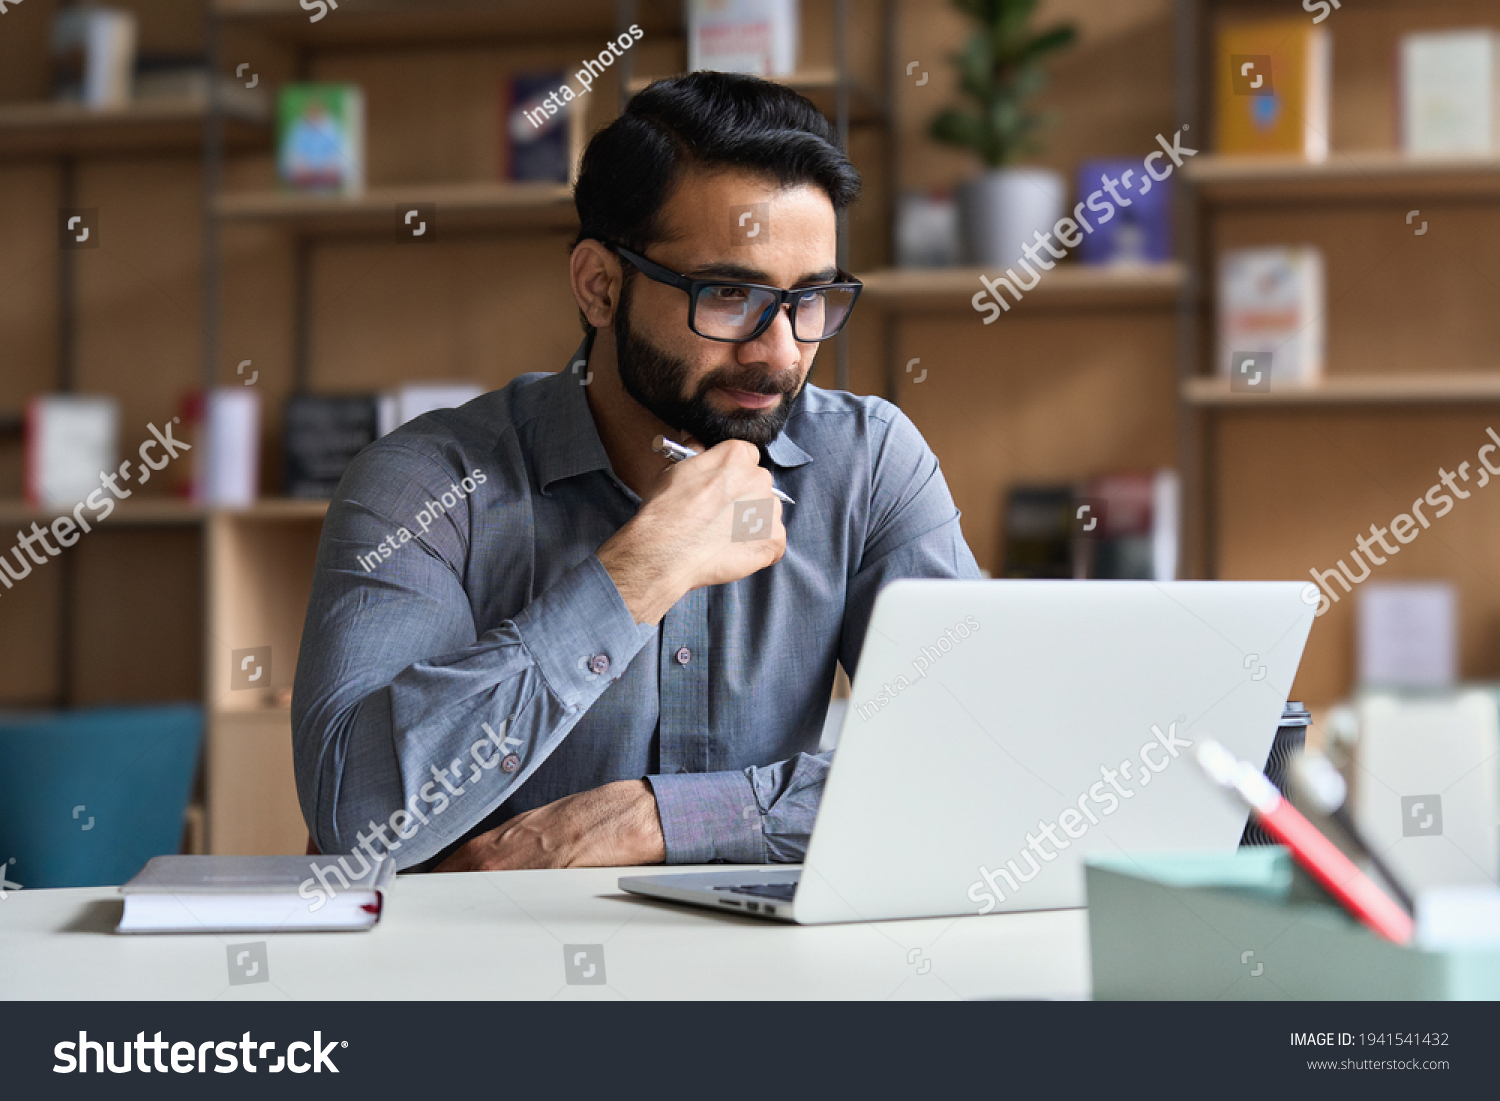 Young serious indian professional business man, focused ethnic male student wearing glasses working on laptop, remote studying using computer looking at screen watching seminar webinar at home office. #1941541432